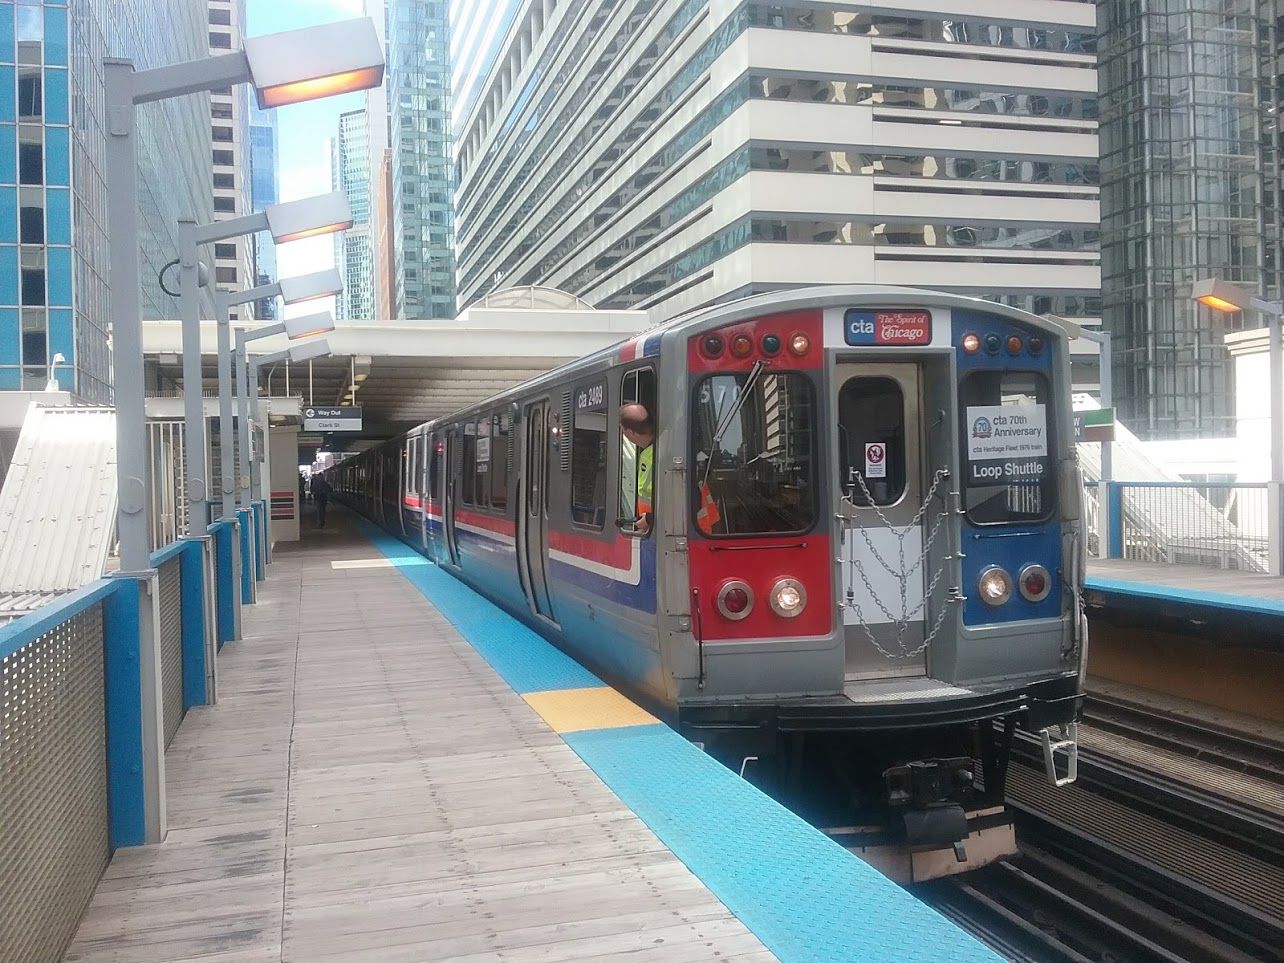 A Boeing Series 2400 car running on Chicago's transit system.